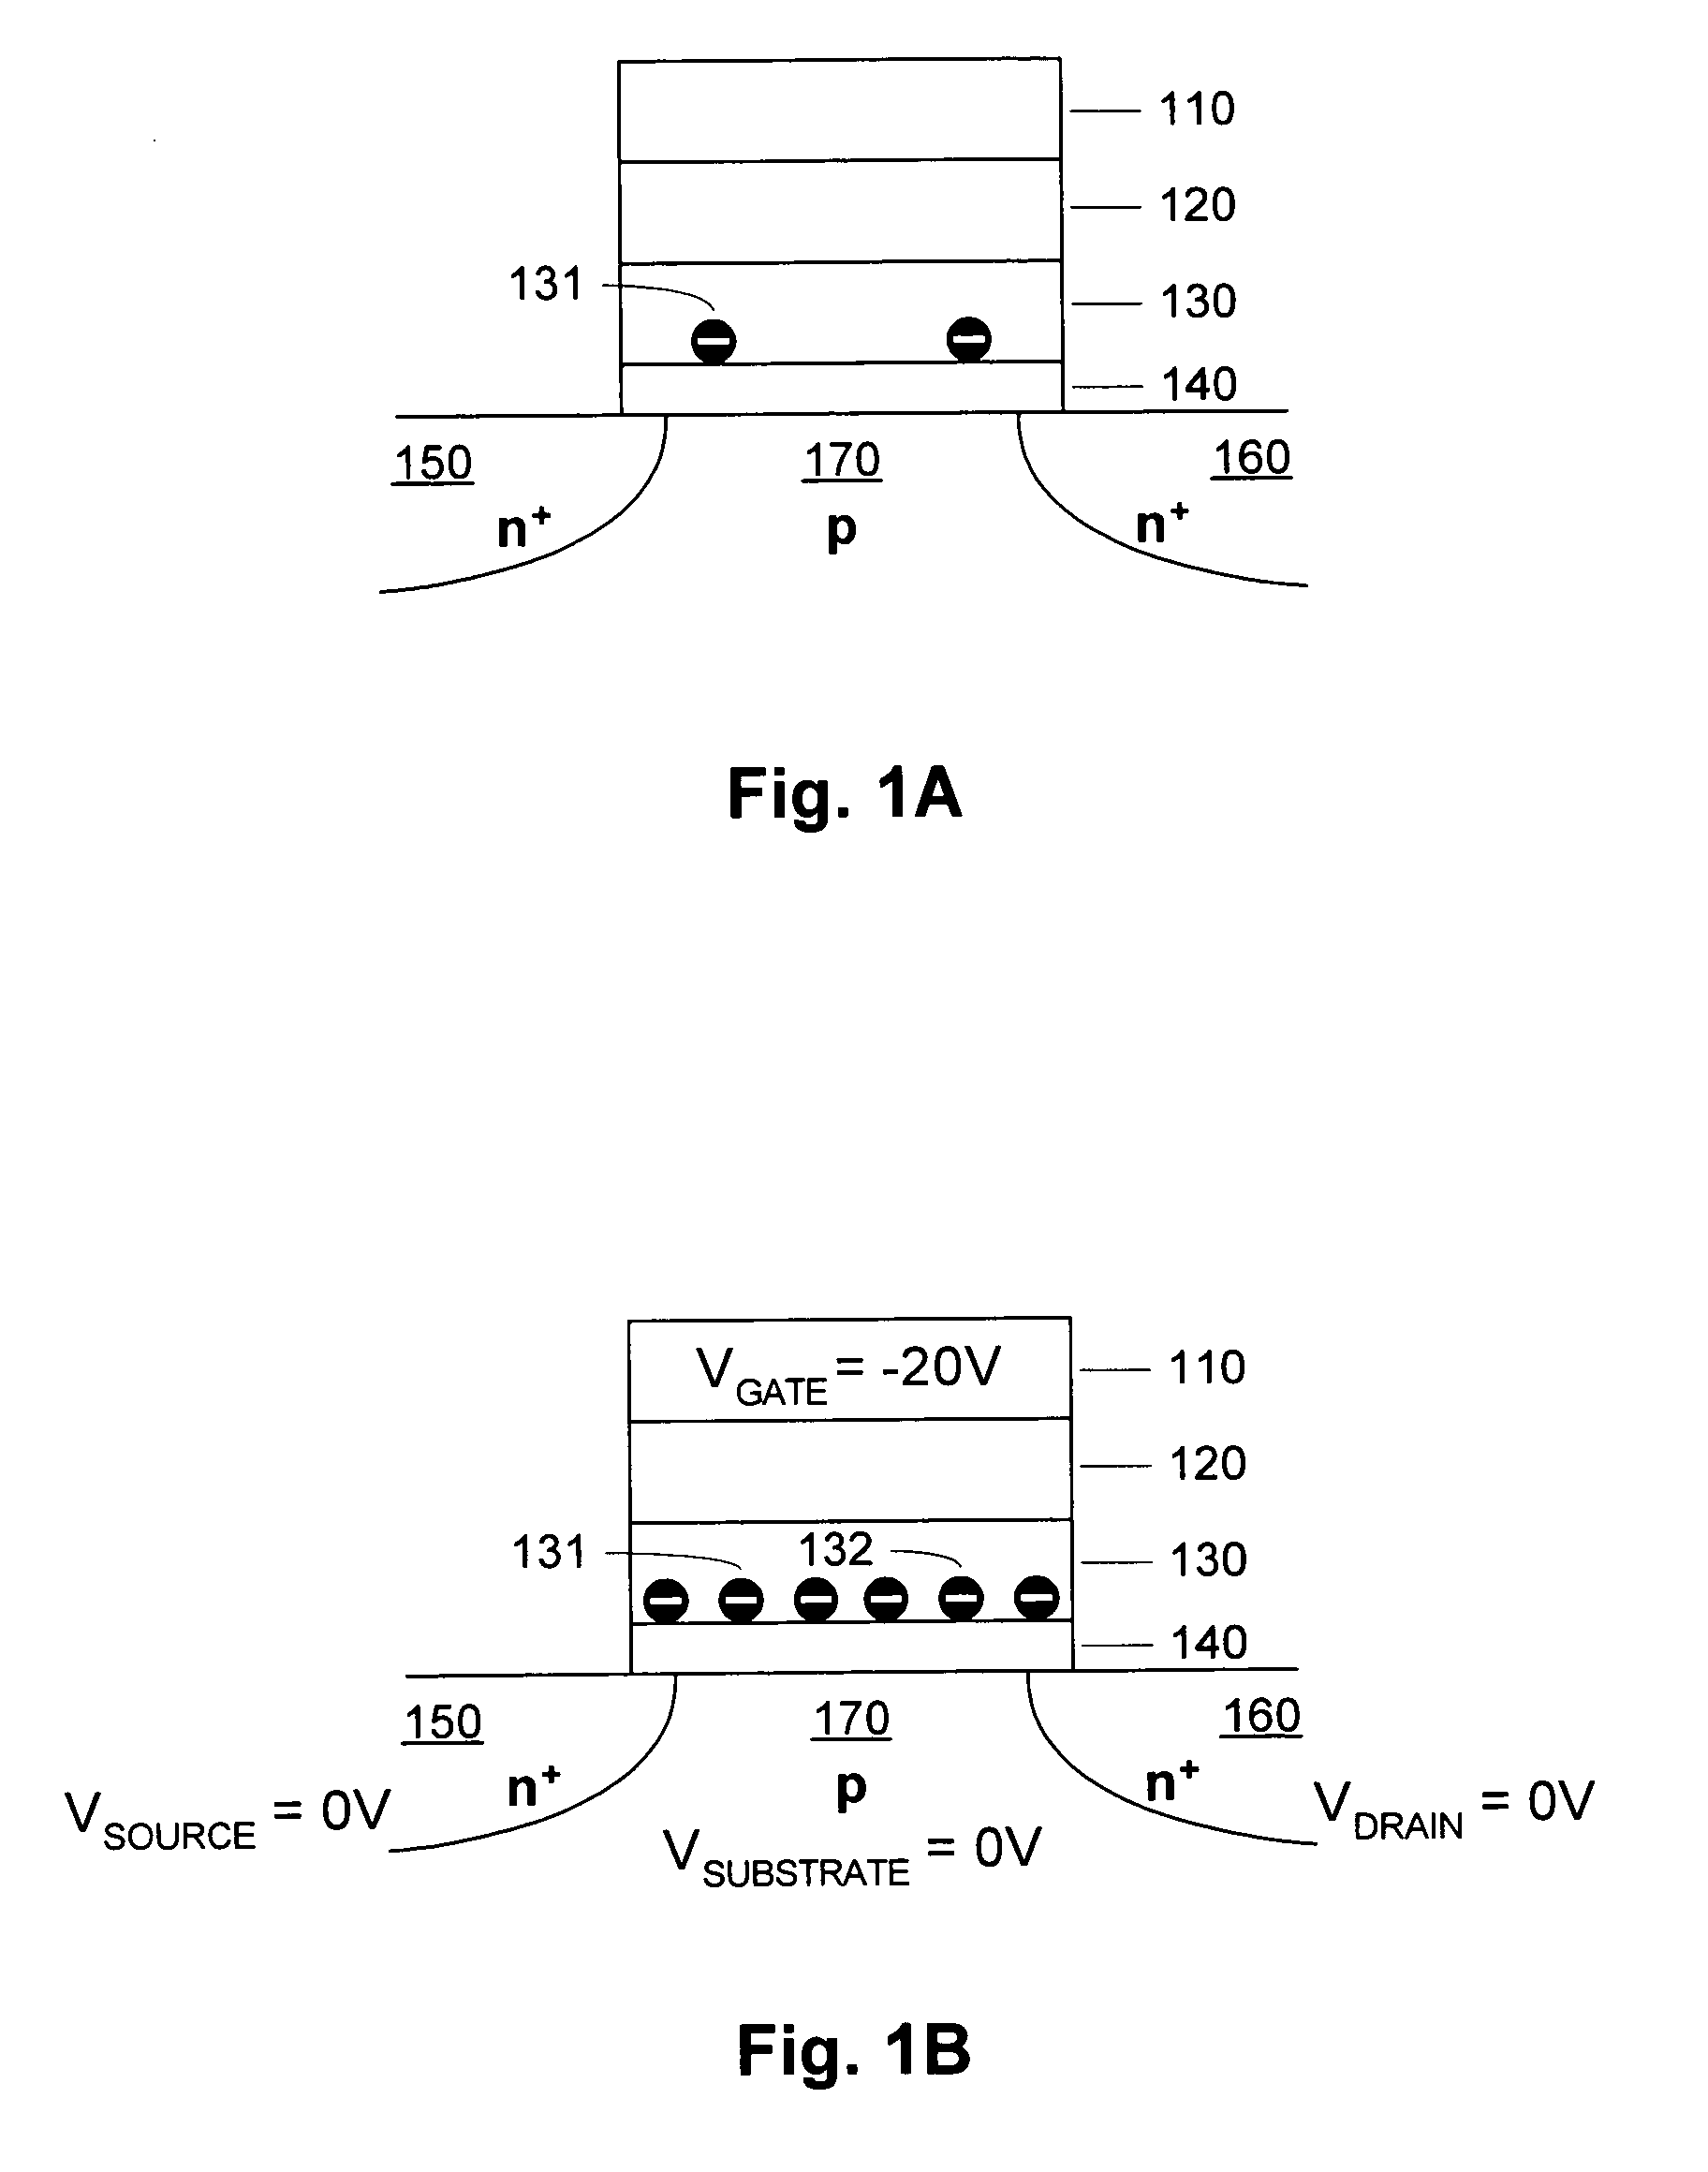 Operation scheme with high work function gate and charge balancing for charge trapping non-volatile memory